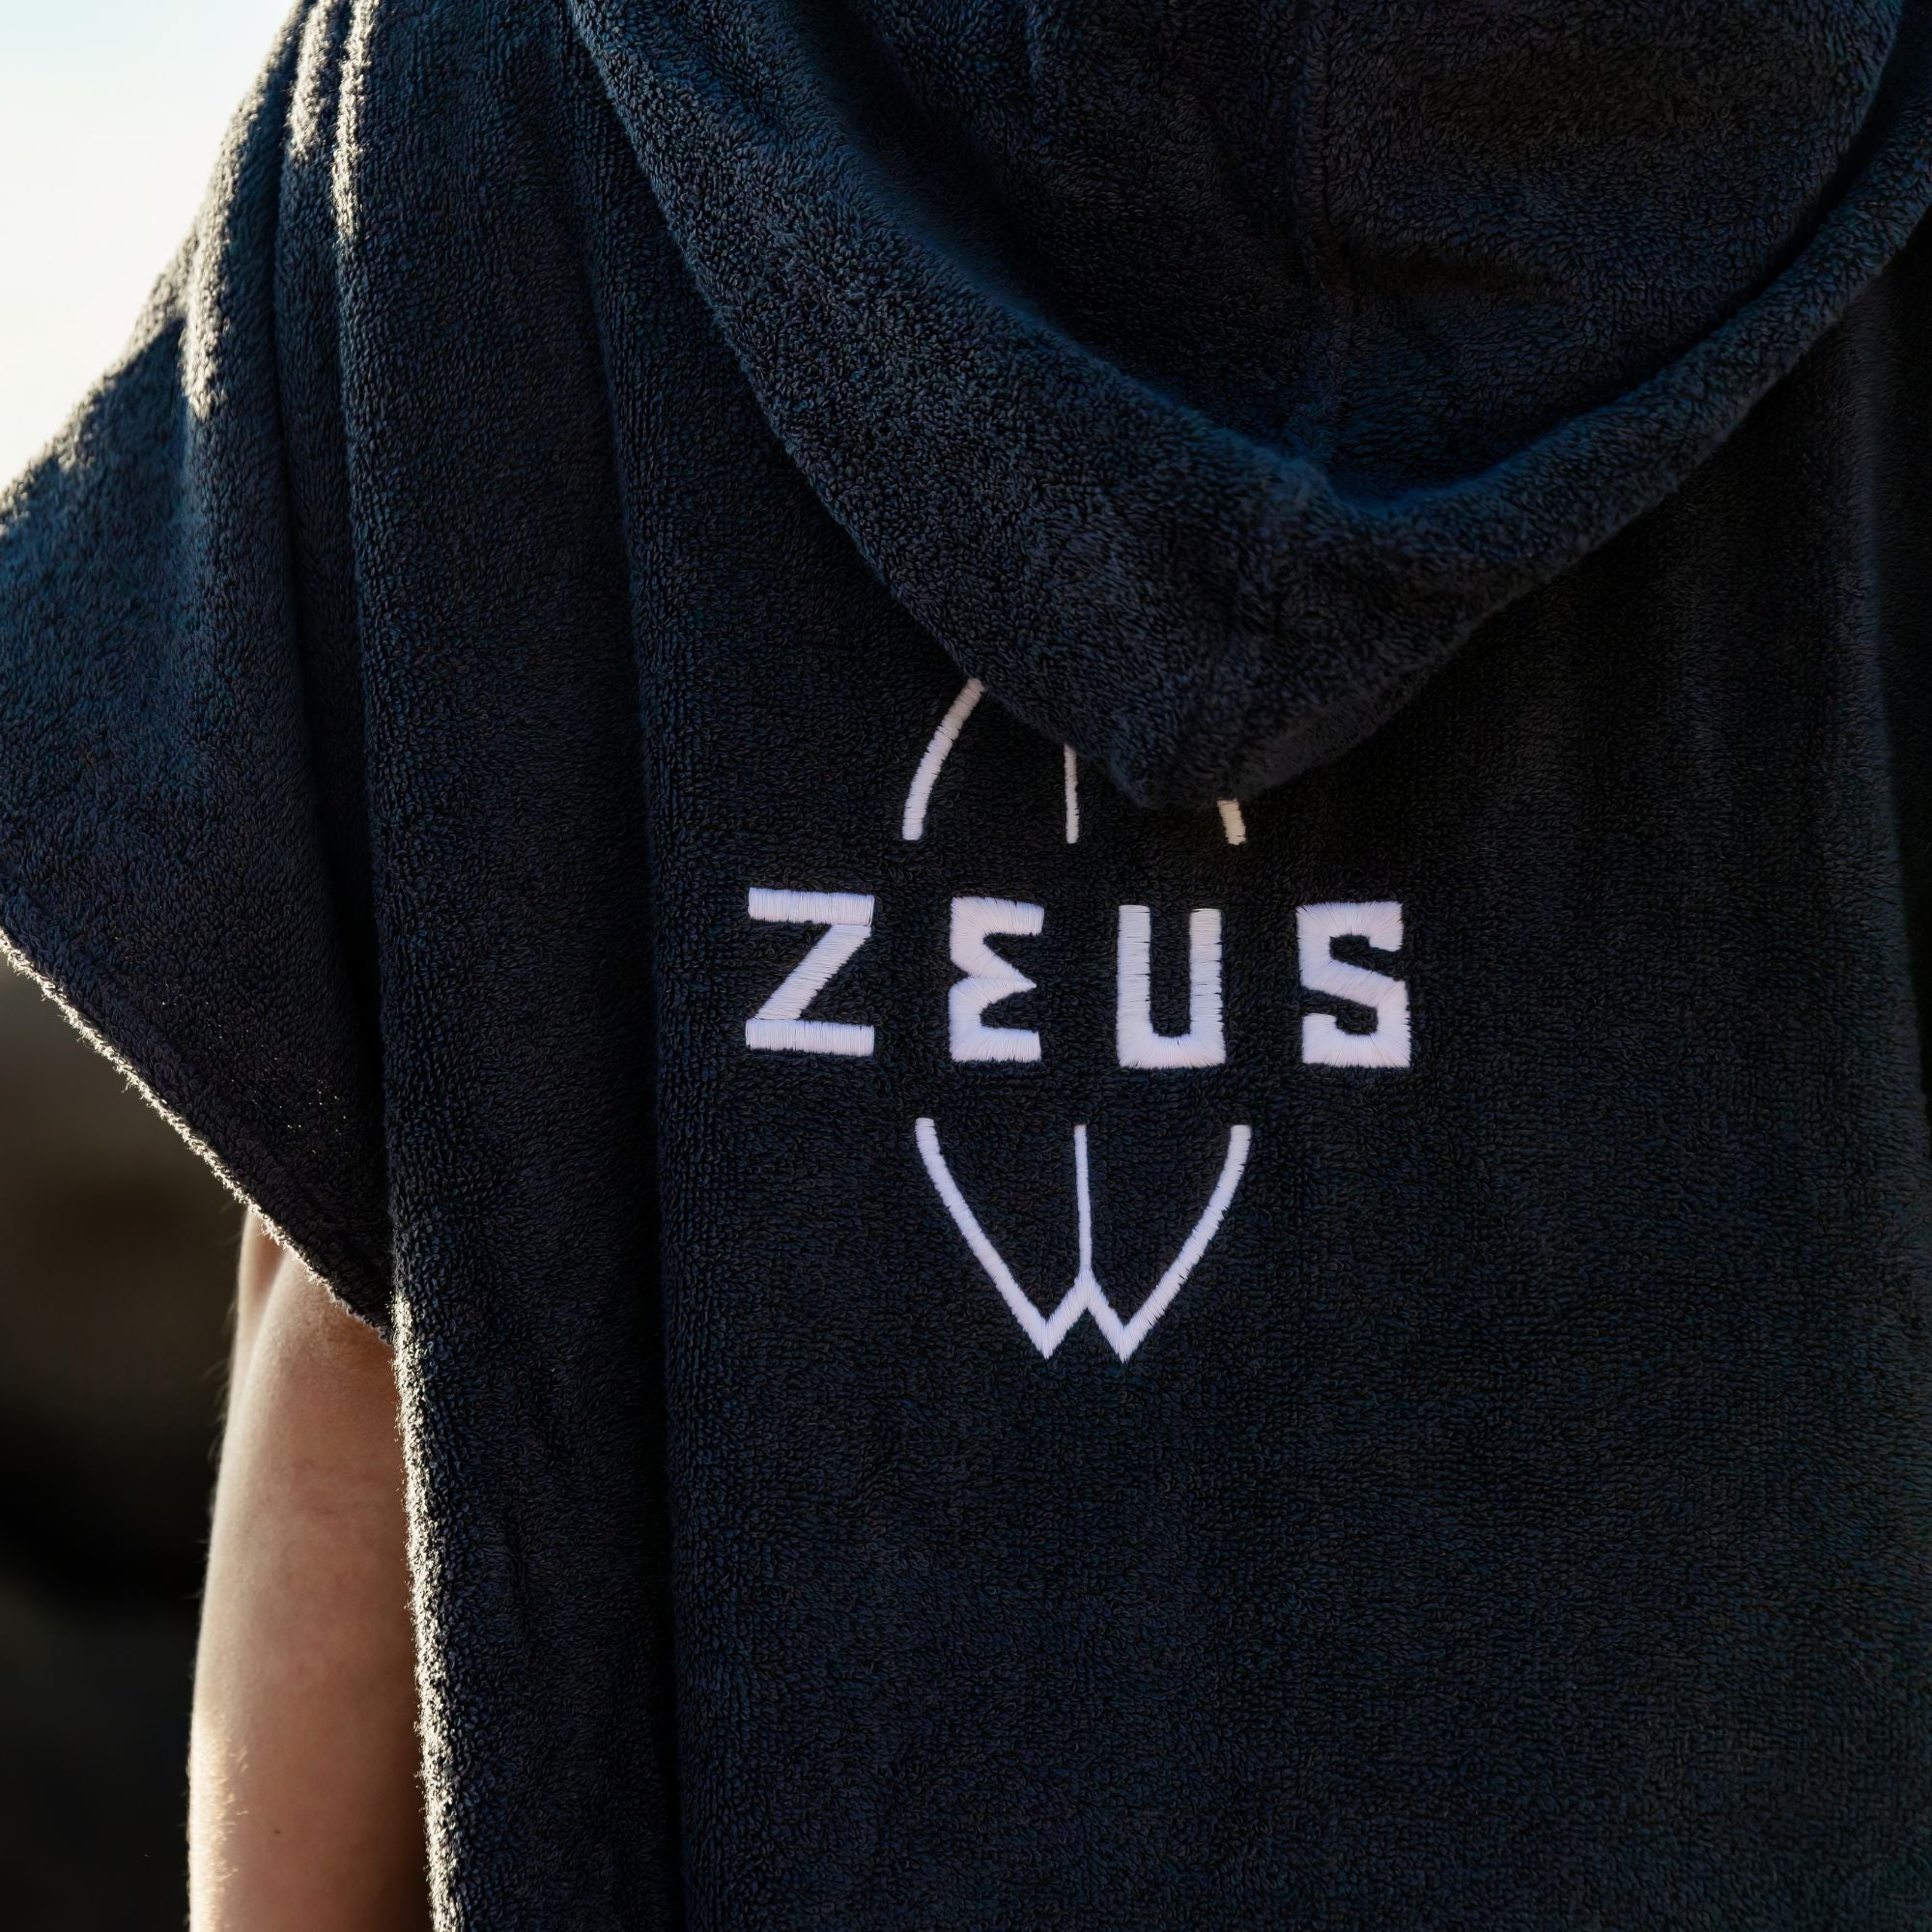 a person wearing a black hoodie with the word jesus printed on it